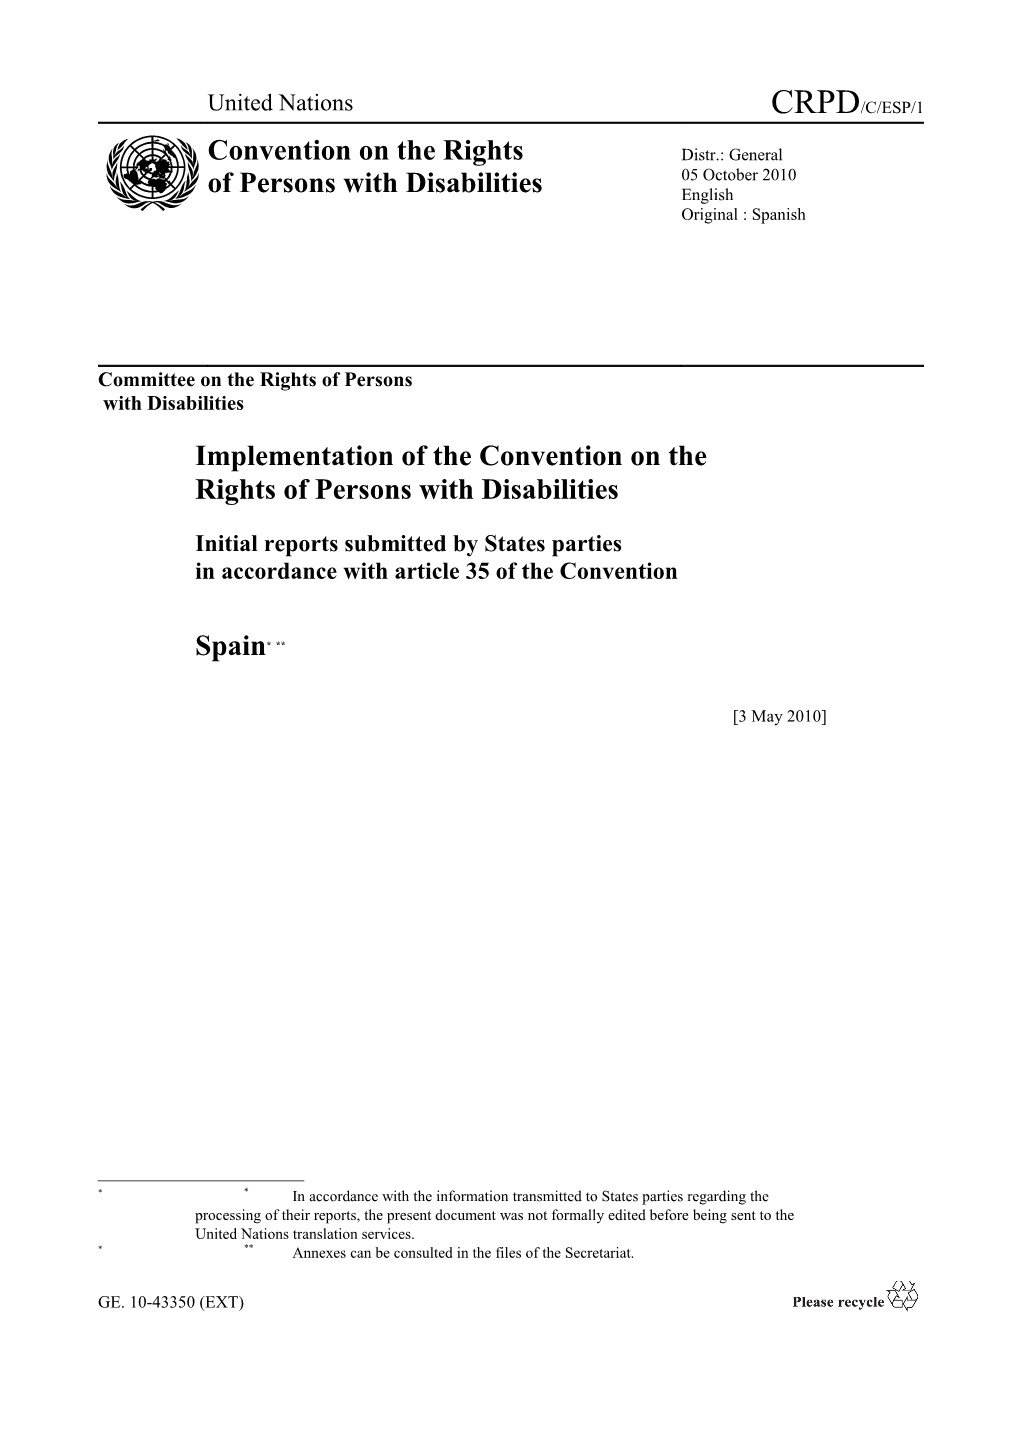 Implementation of the Convention on The